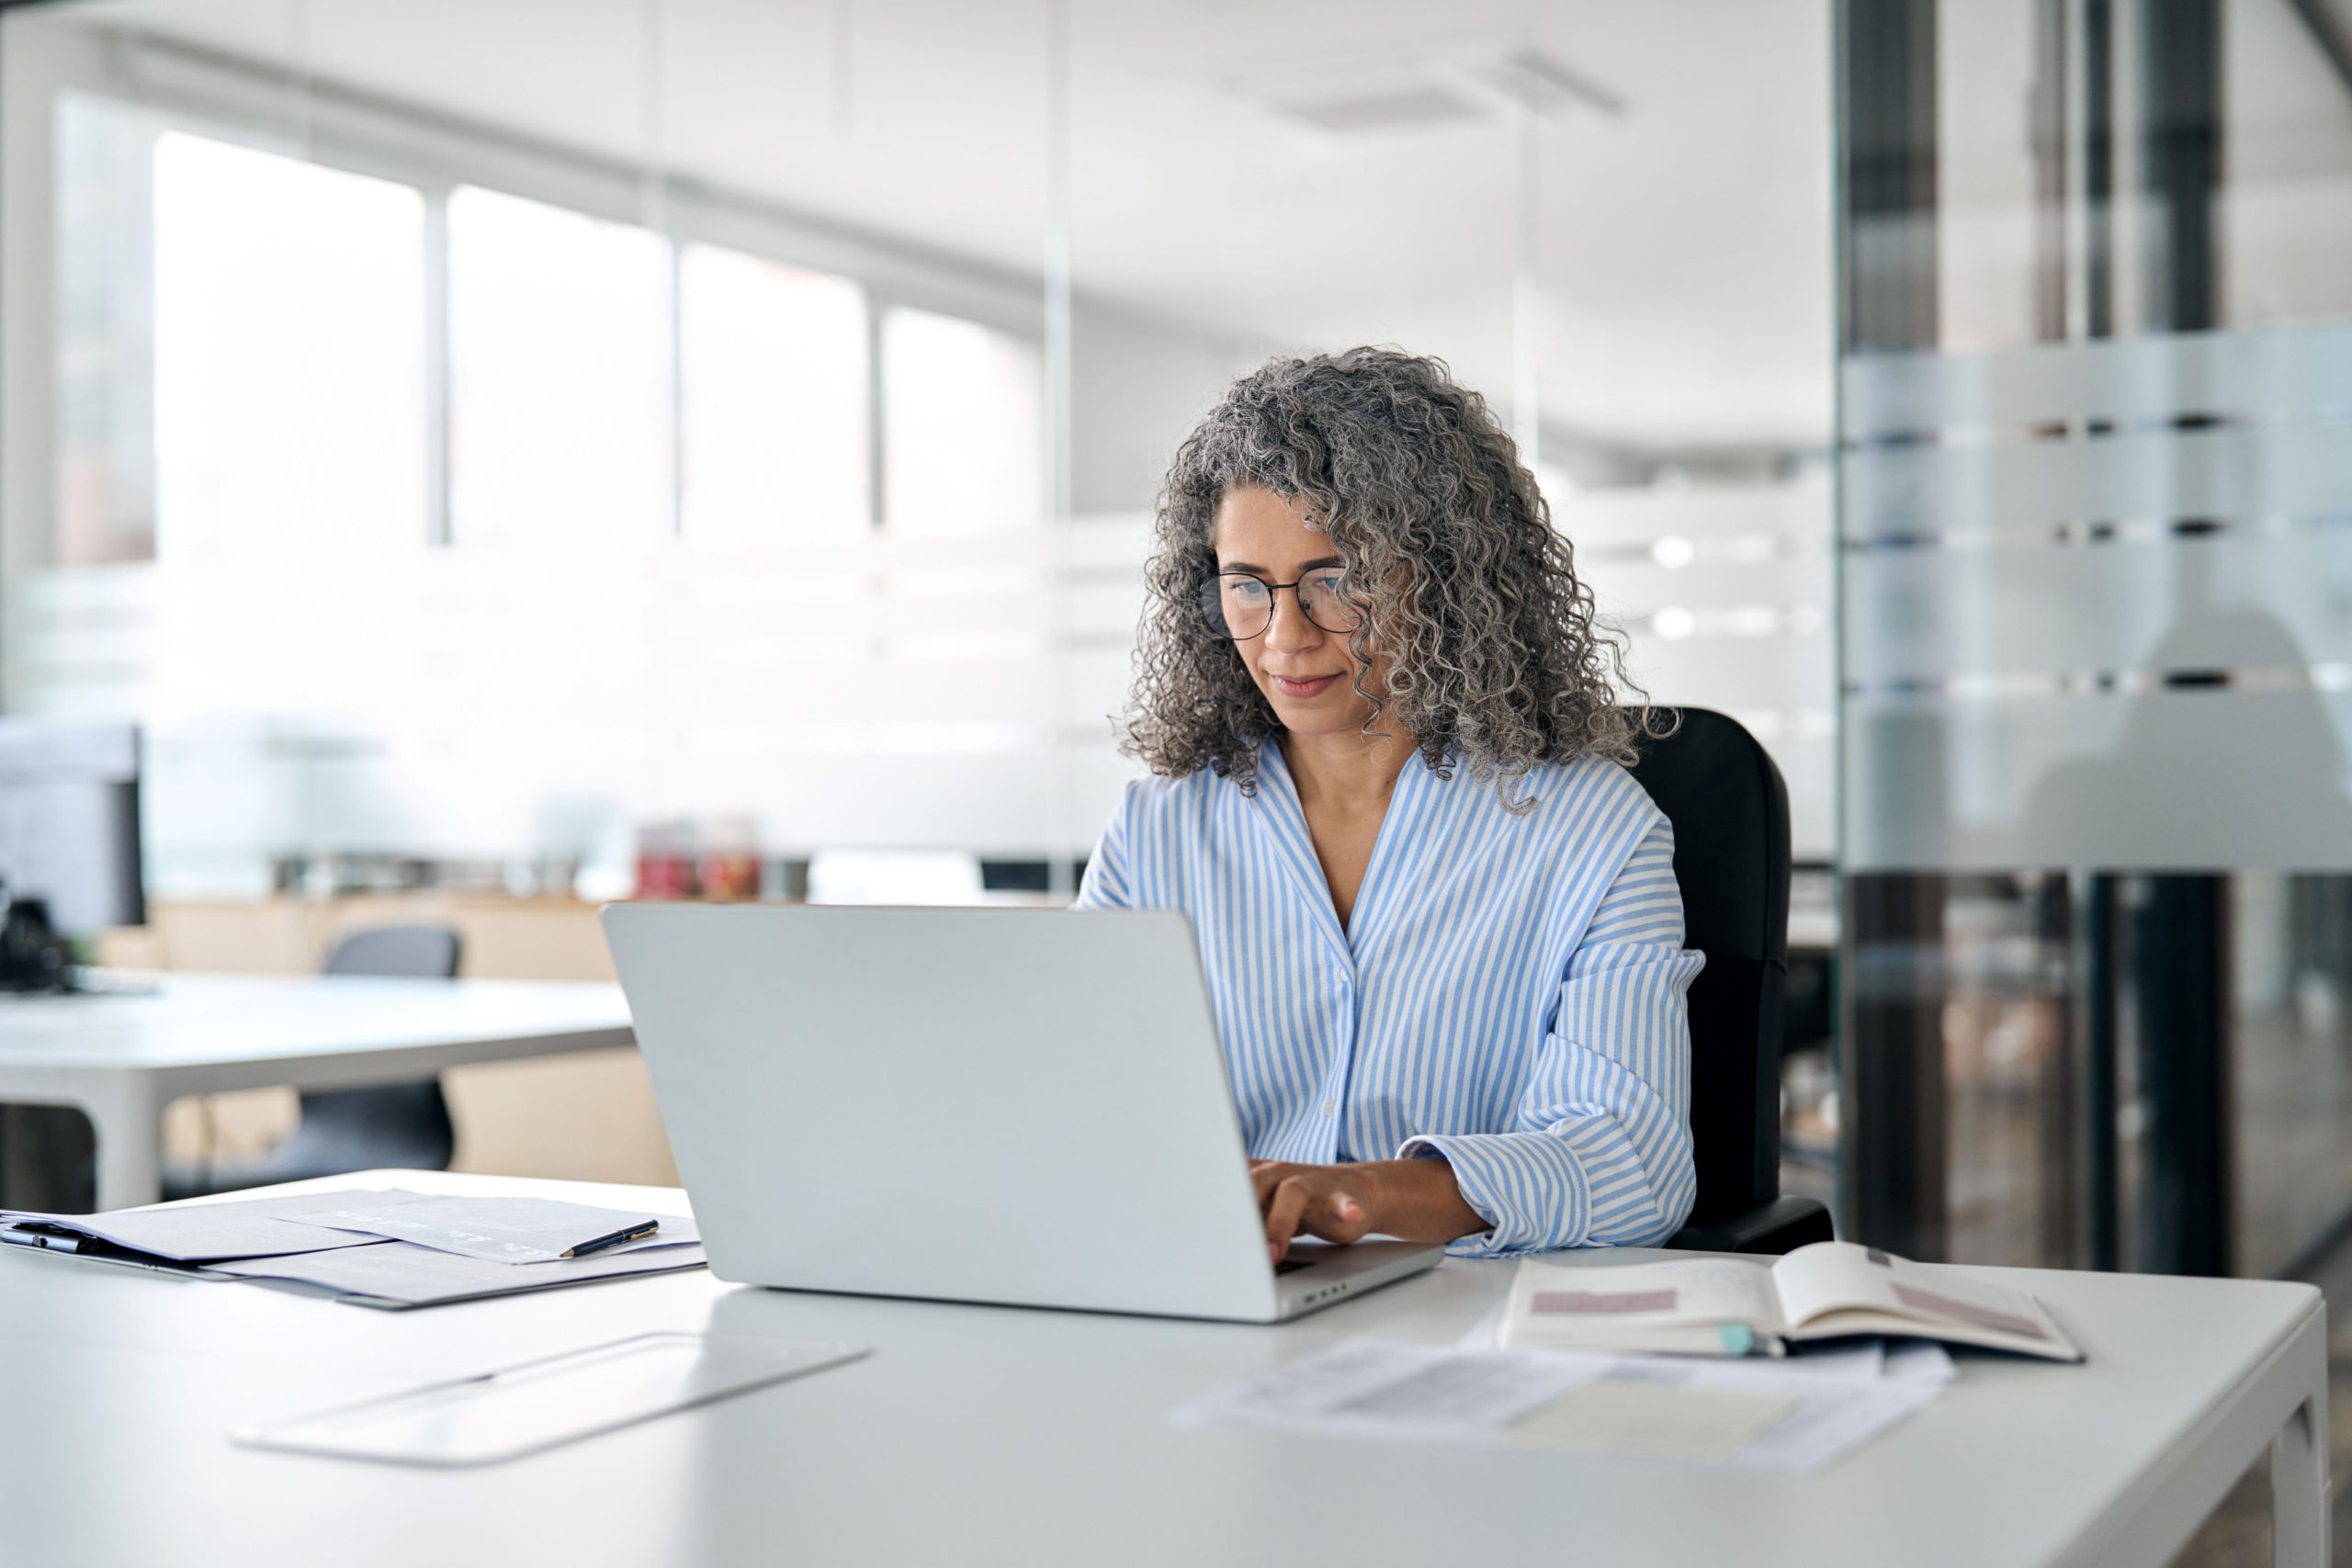 Business woman with laptop represents woman starting an RIA